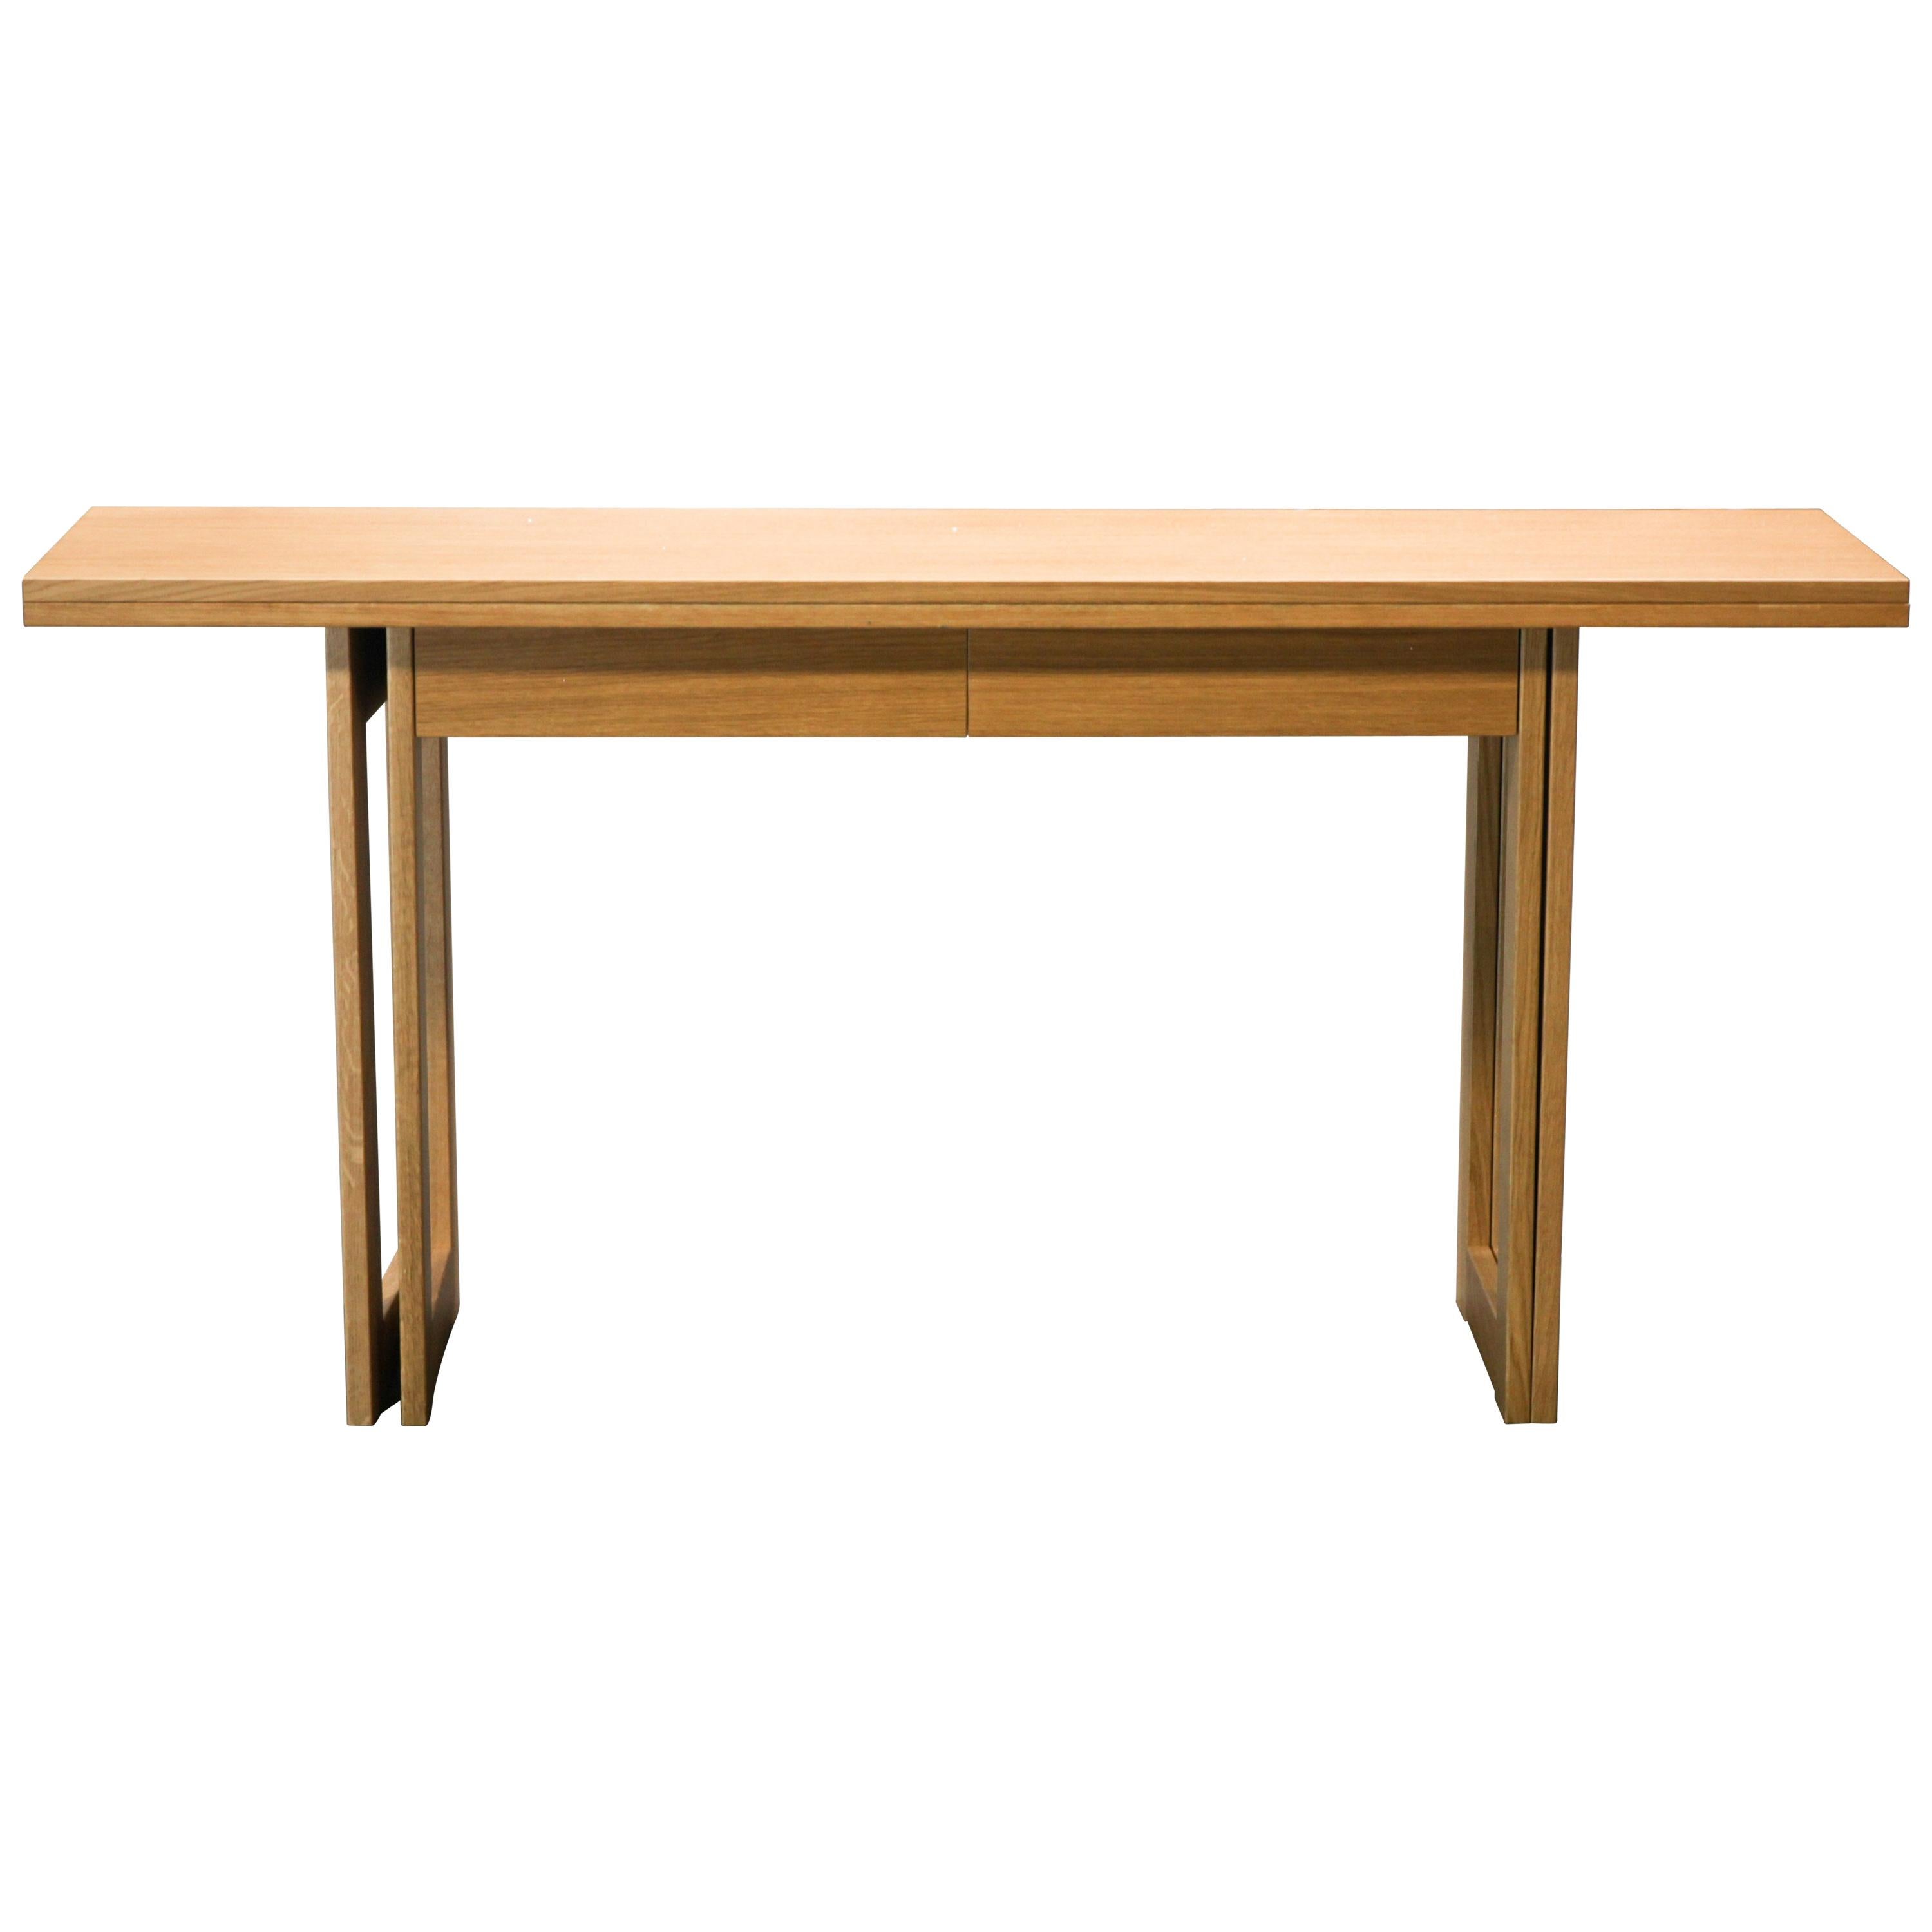 Christian Liaigre Modern Convertible Console Table with Drawers